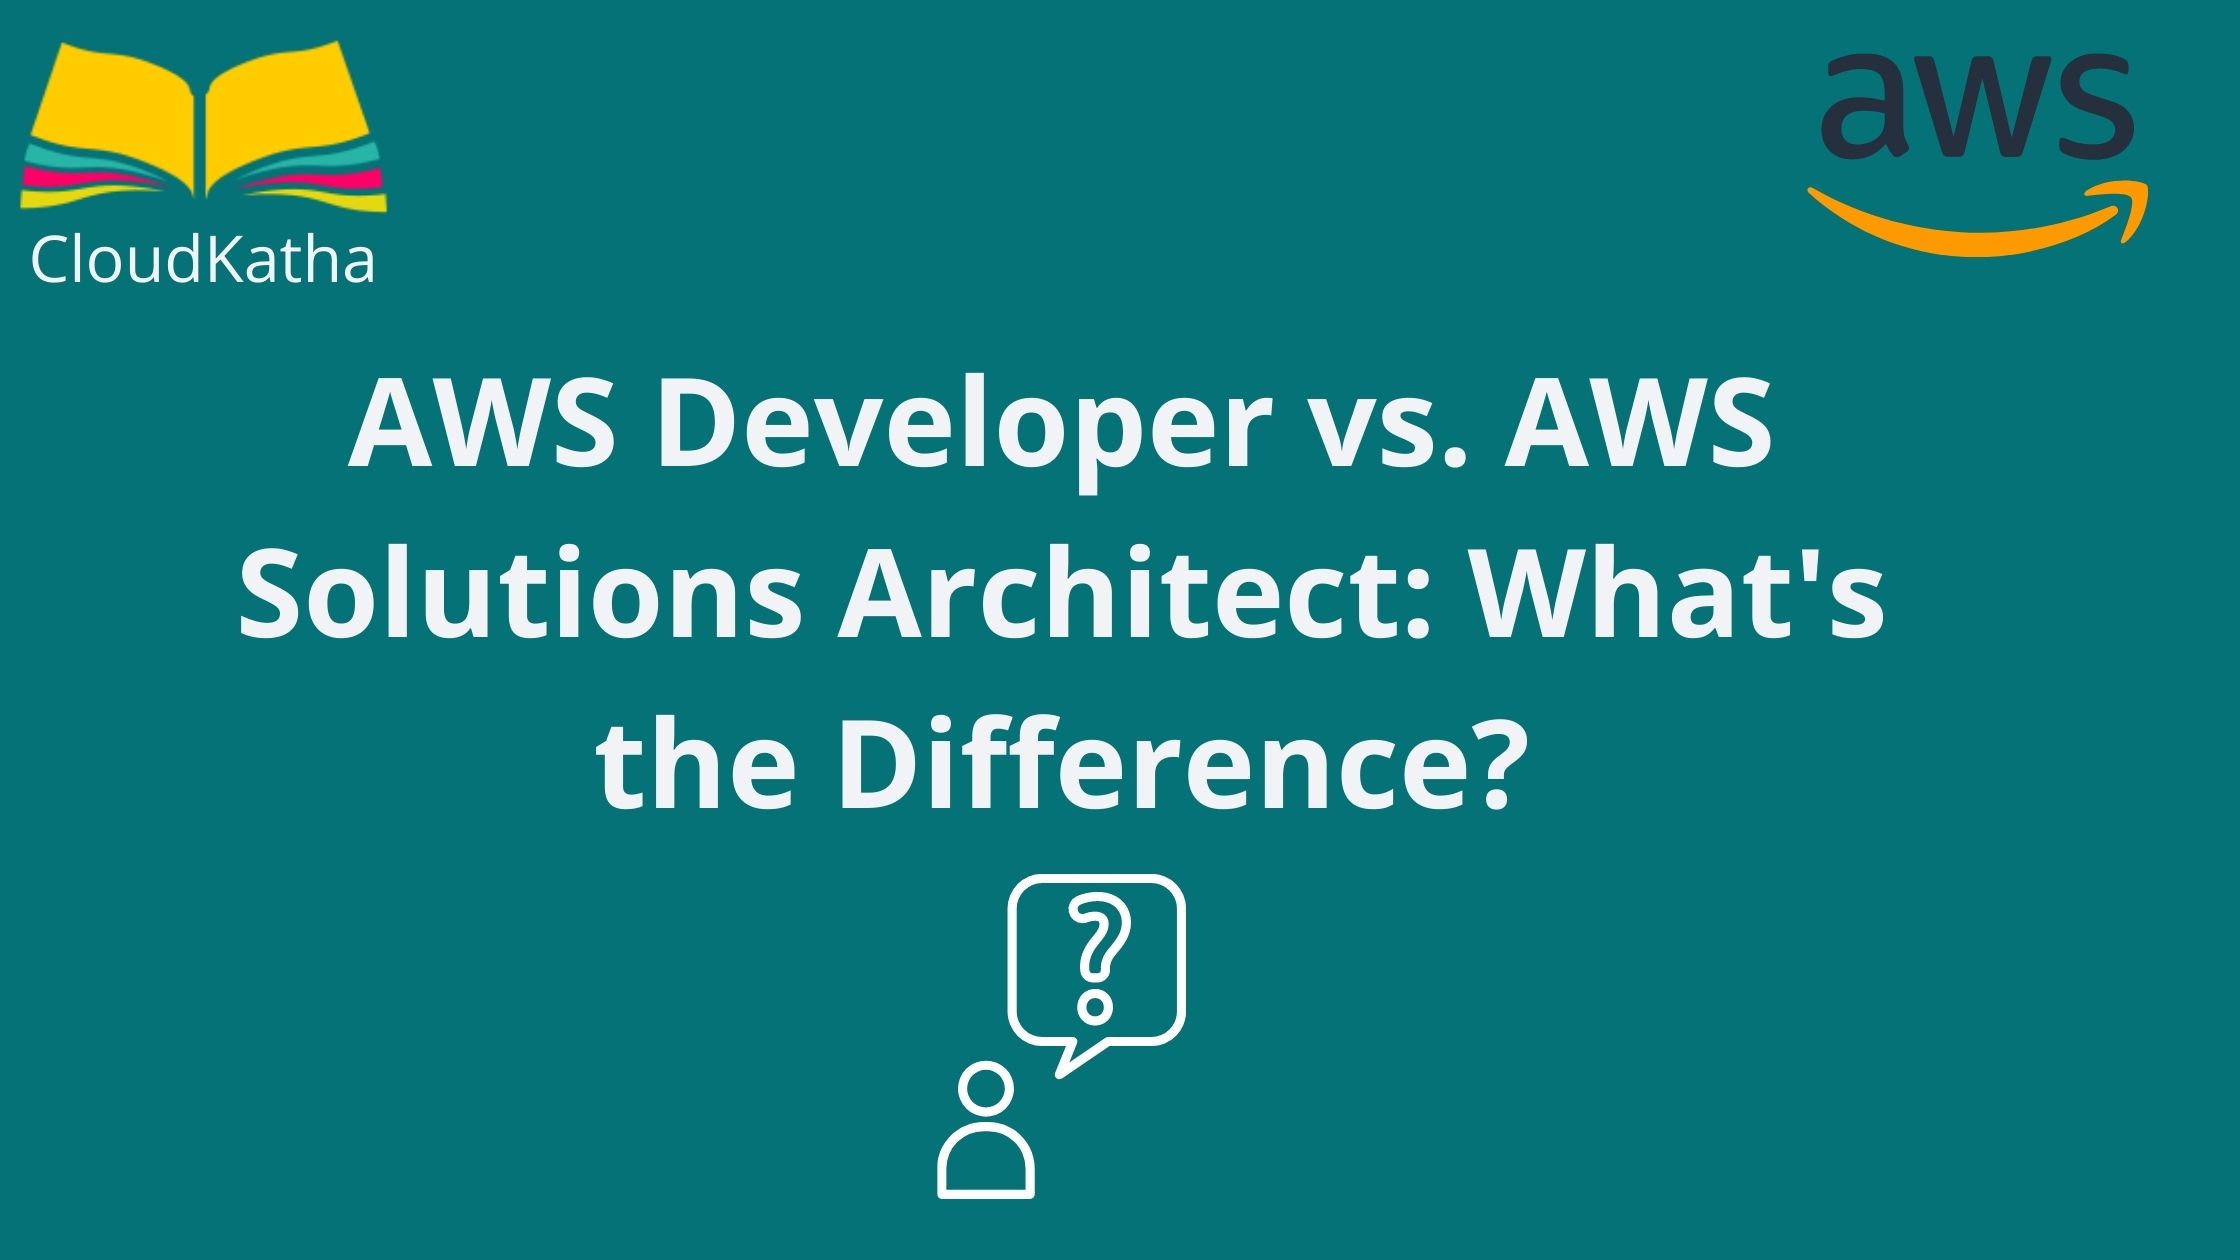 AWS Developer vs. AWS Solutions Architect: What's the Difference?